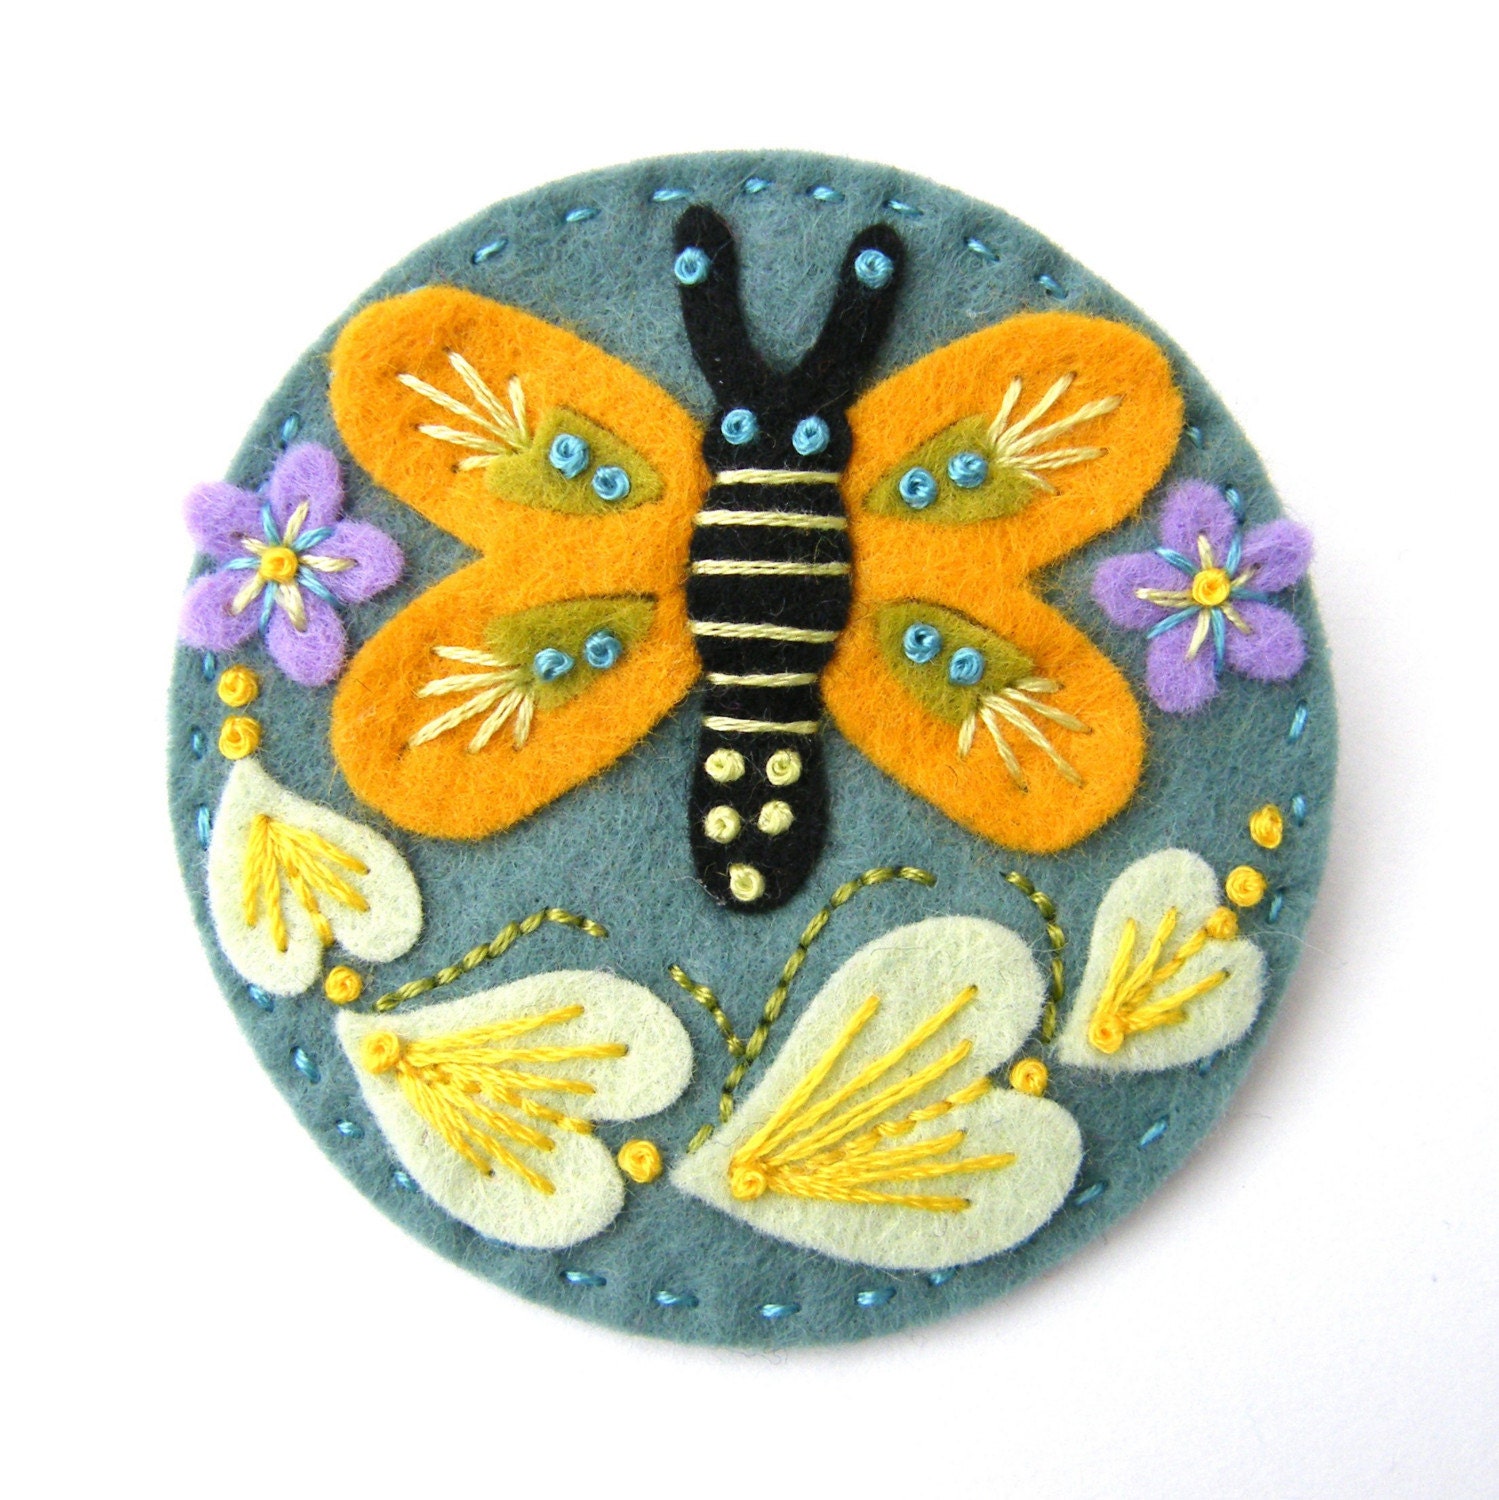 BUTTERFLY FELT BROOCH WITH FREEFORM EMBROIDERY